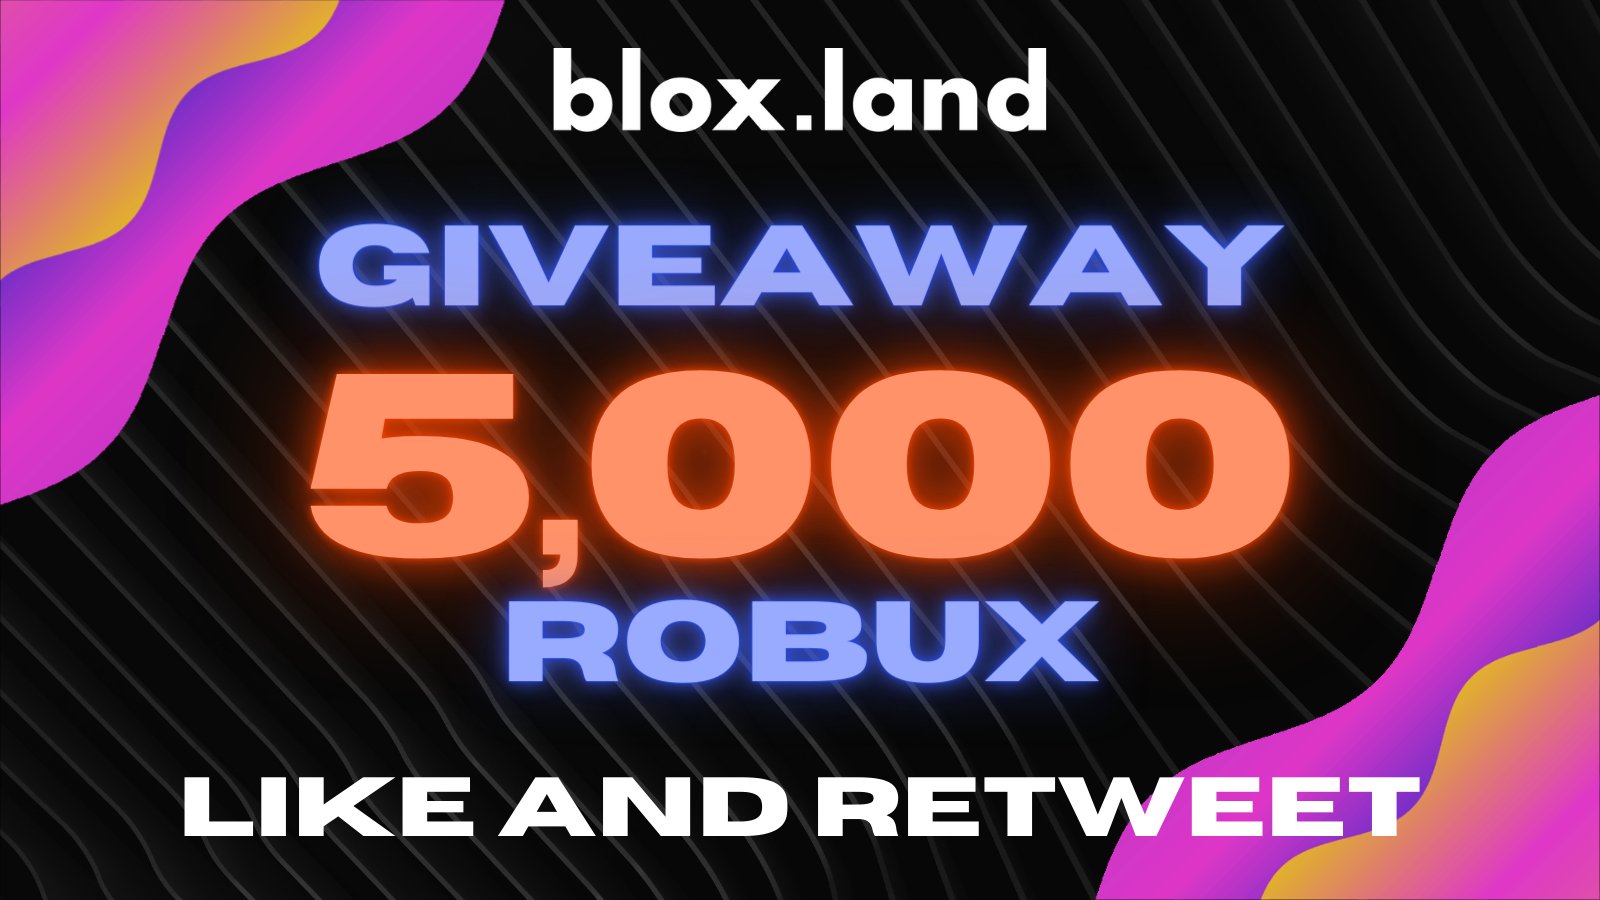 BLOX.LAND on X: 🥊 Today is Follower Monday! 🥊 Every Monday, we give  5,000 #Robux to one lucky winner who follows us. Follow @BloxLandRBX for  more #Giveaway and other updates to #bloxland!